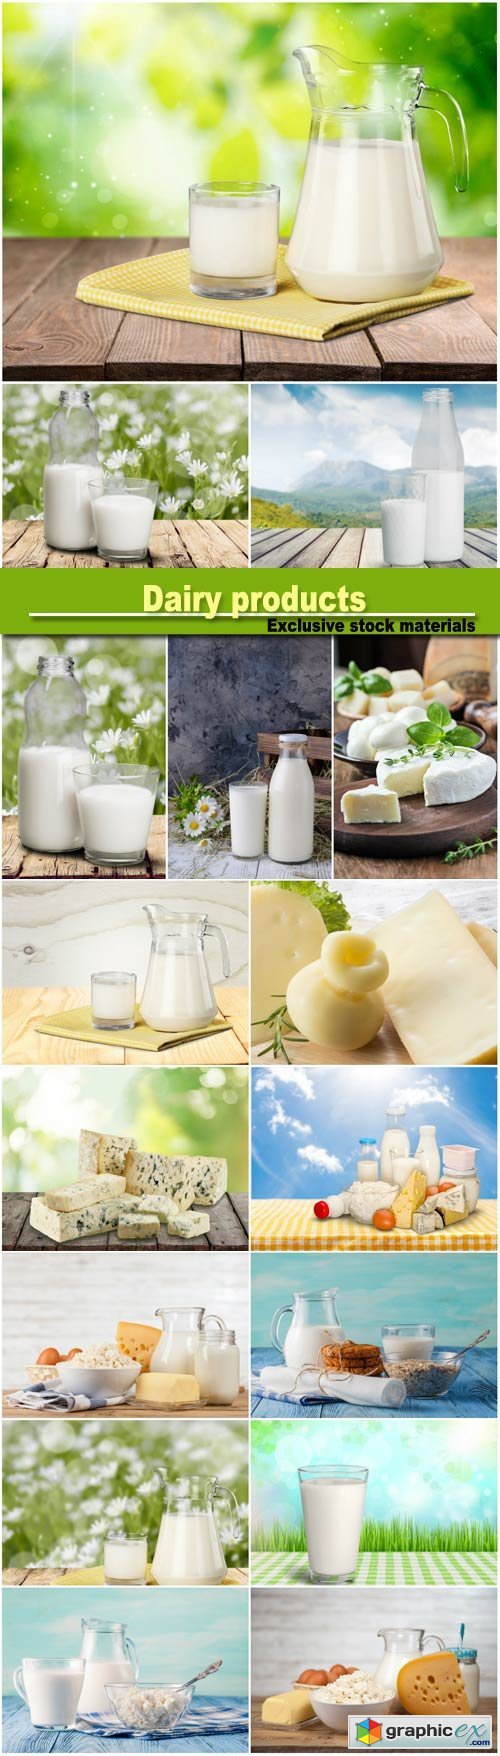 Dairy products, cheese and milk